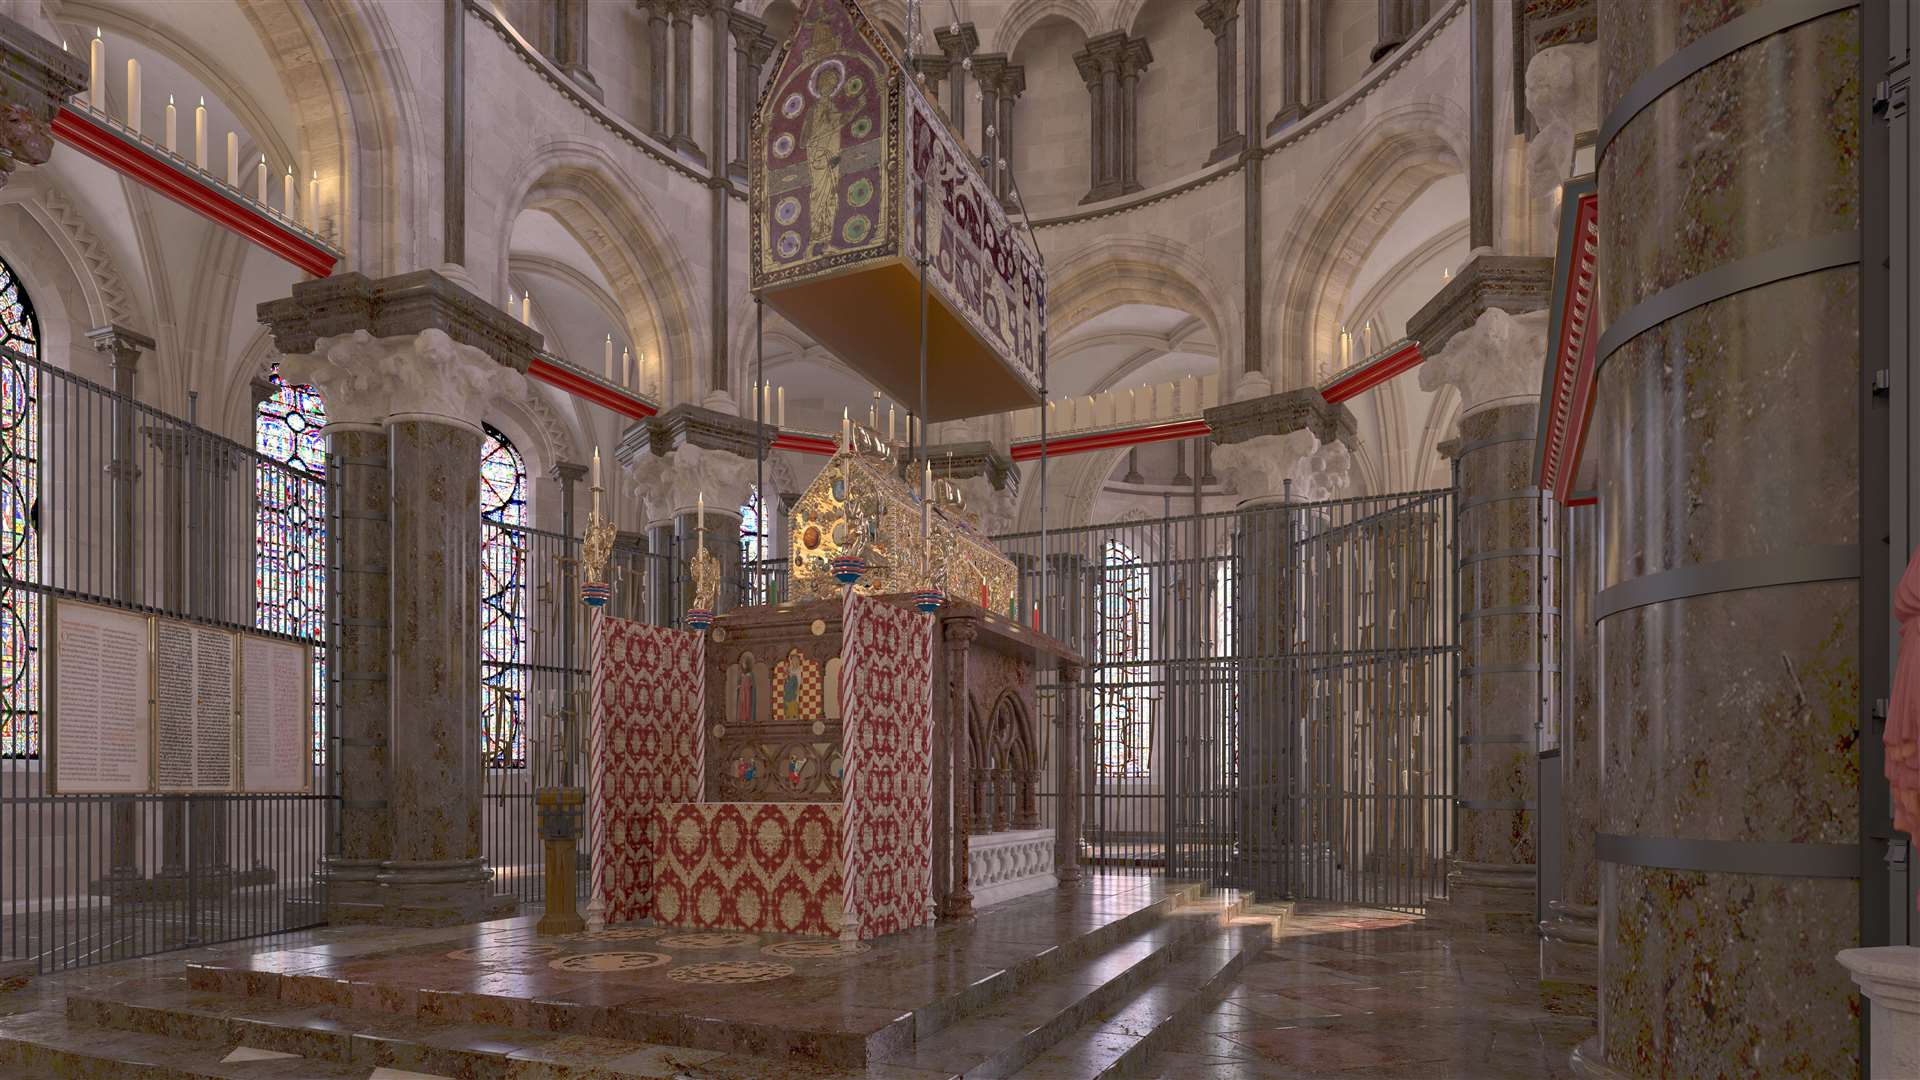 A CGI shrine of Thomas Becket, medieval England's most important pilgrimage but destroyed by King Henry VIII, has been digitally reconstructed for the modern public. Picture: SWNS